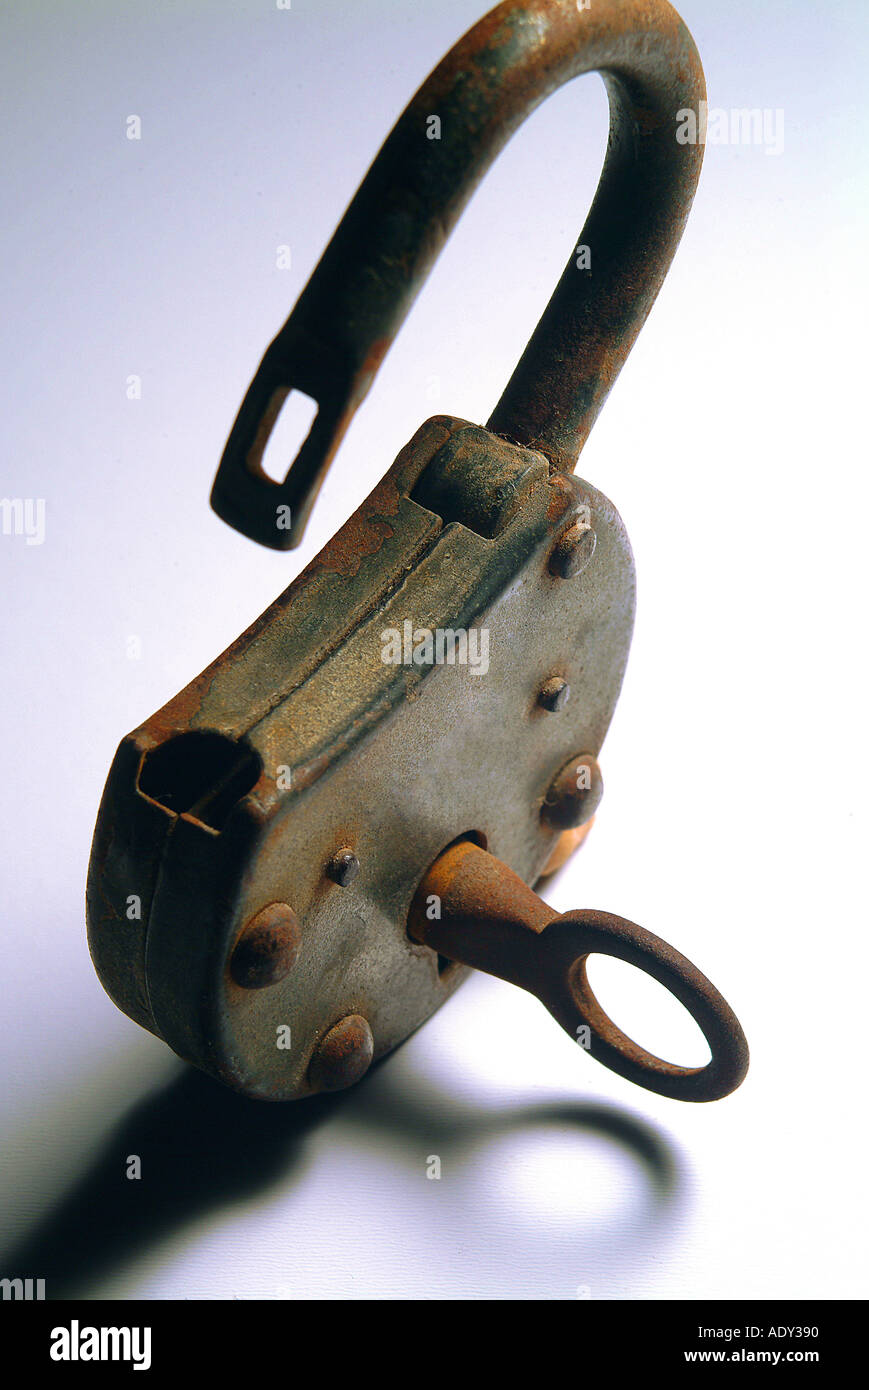 Business Concepts I padlock lock key open safety security object metal metallic old rusty rusted business concept Stock Photo